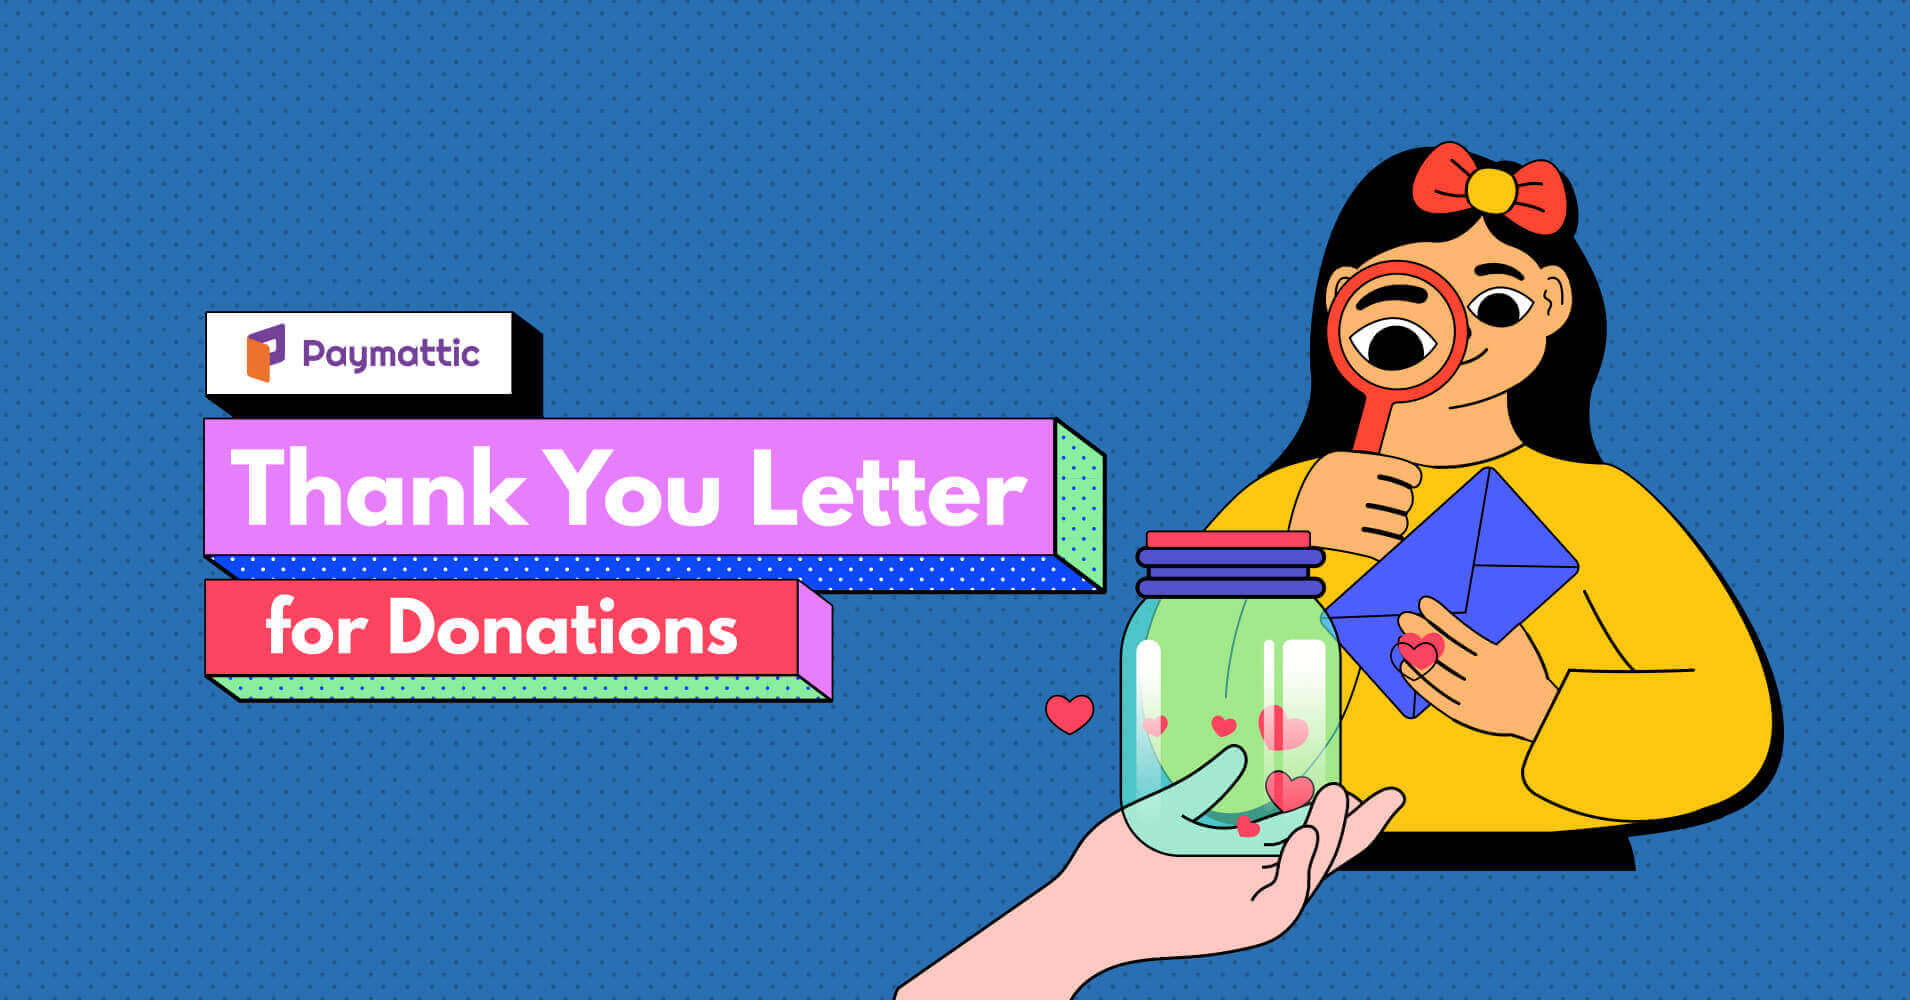 Thank-You Letter for Donations